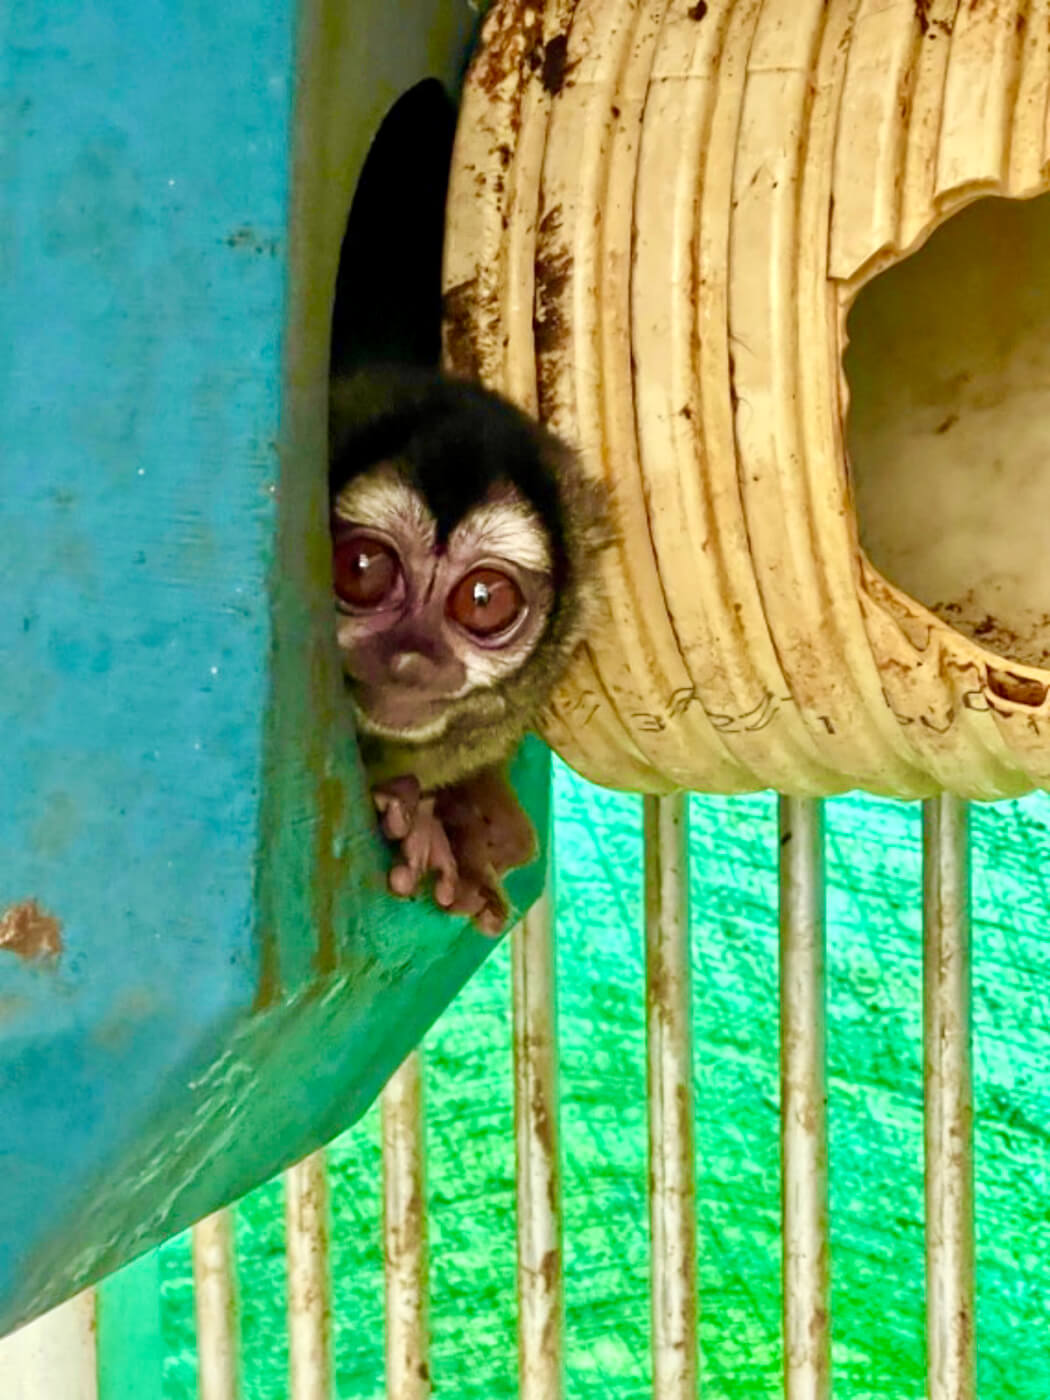 VIV Colombian Fundacion Centro de Primates FUCEP An Aotus monkey in a nest beside a soiled corrugated pipe also serving as a nest edited VS PO 2 Victory! NIH-Funded Monkey Experiments Ended